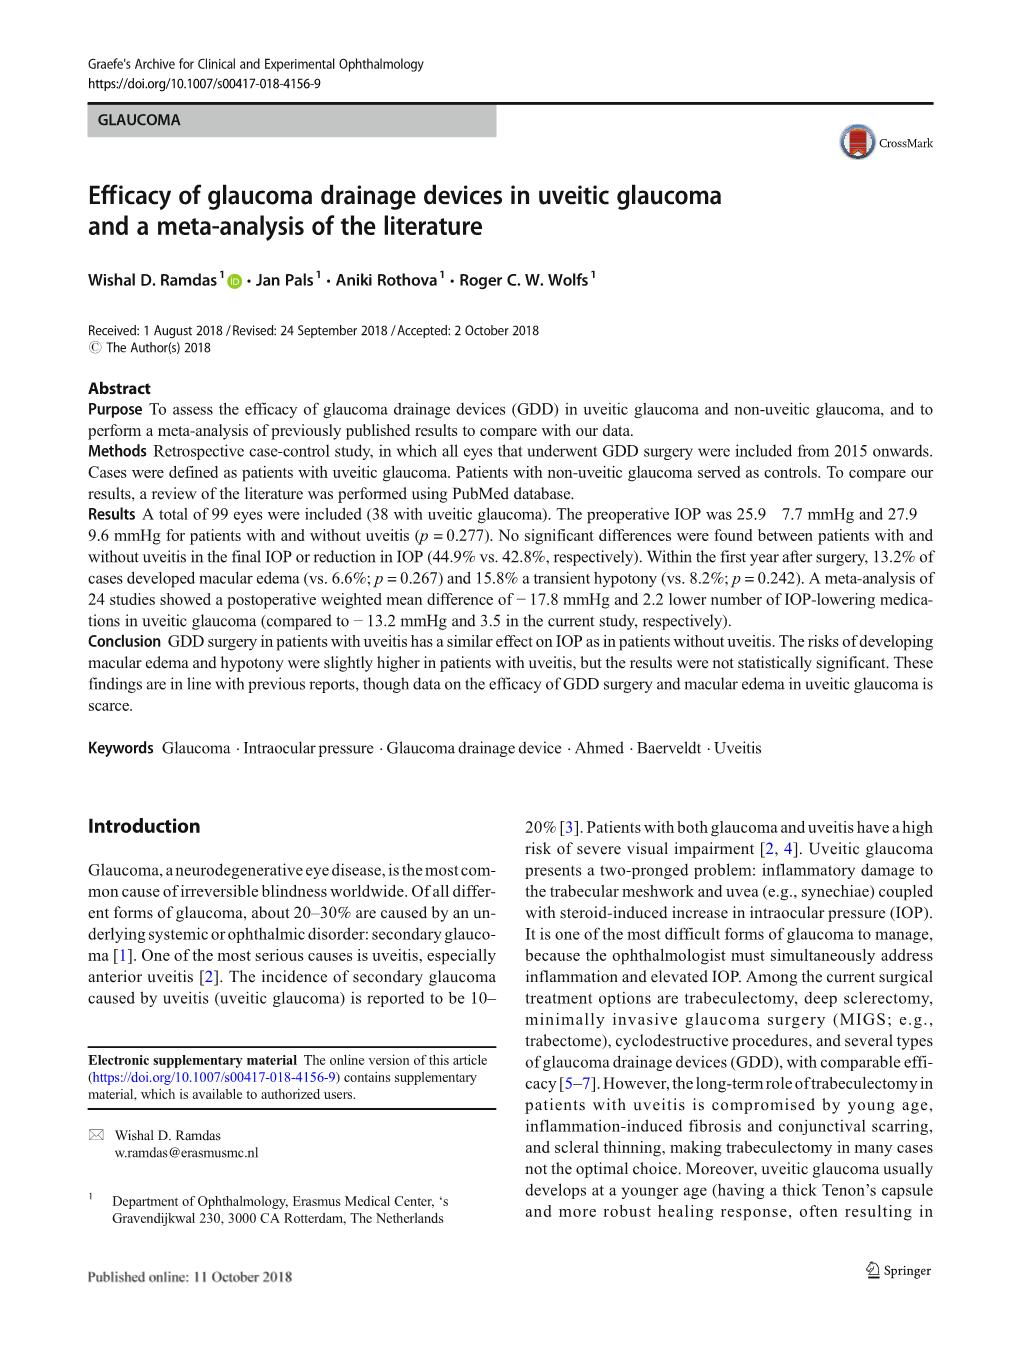 Efficacy of Glaucoma Drainage Devices in Uveitic Glaucoma and a Meta-Analysis of the Literature